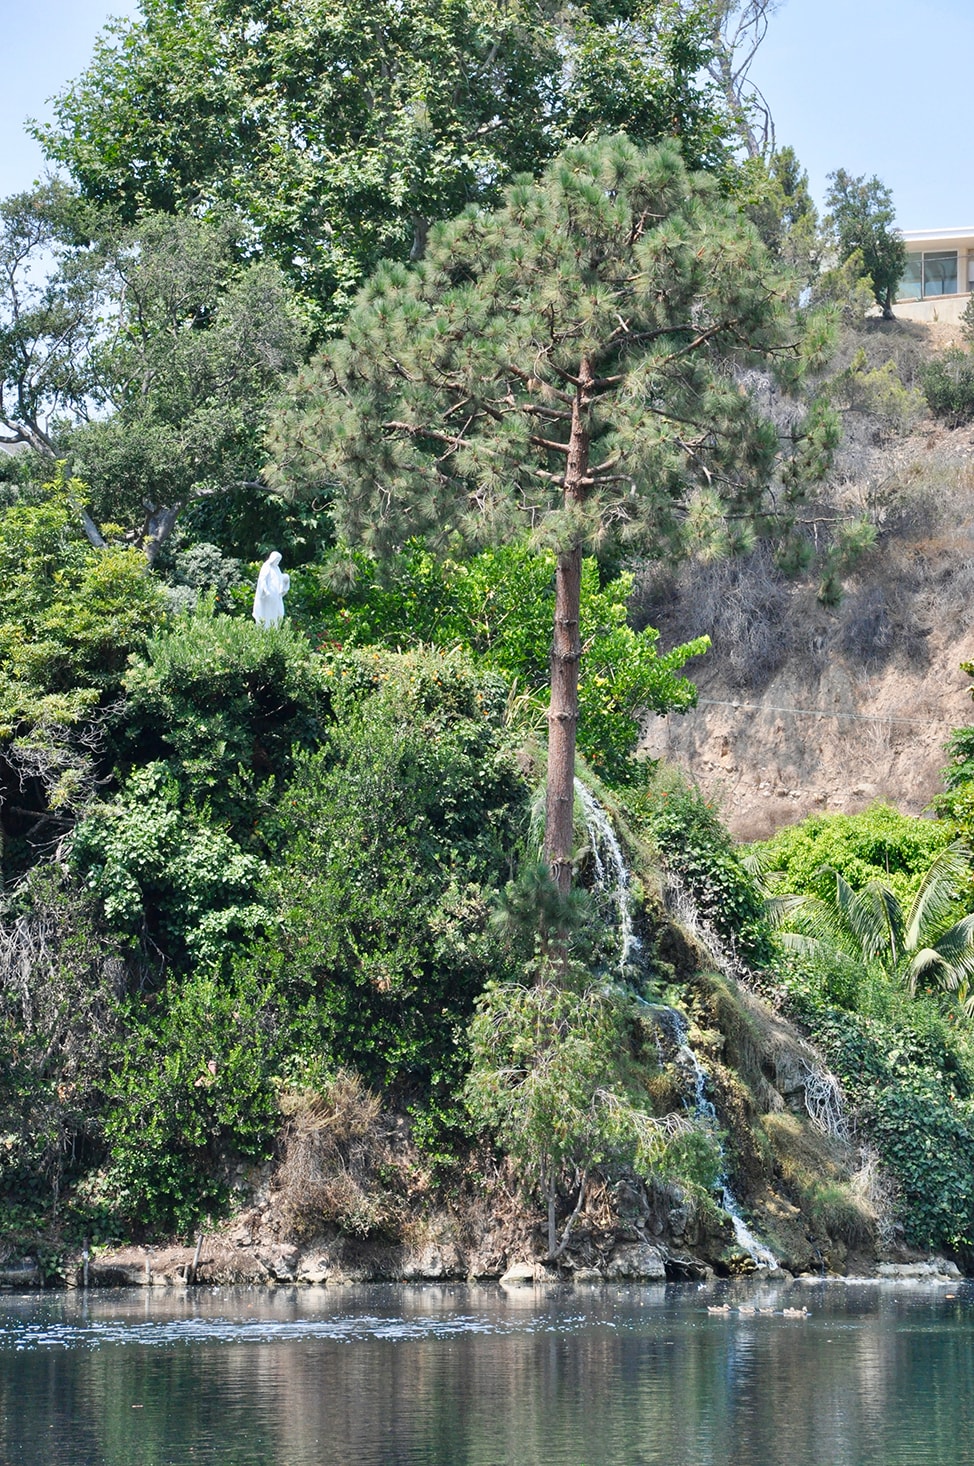 A statue of Jesus Christ stands on a green hillside with a waterfall trickling toward the lake.